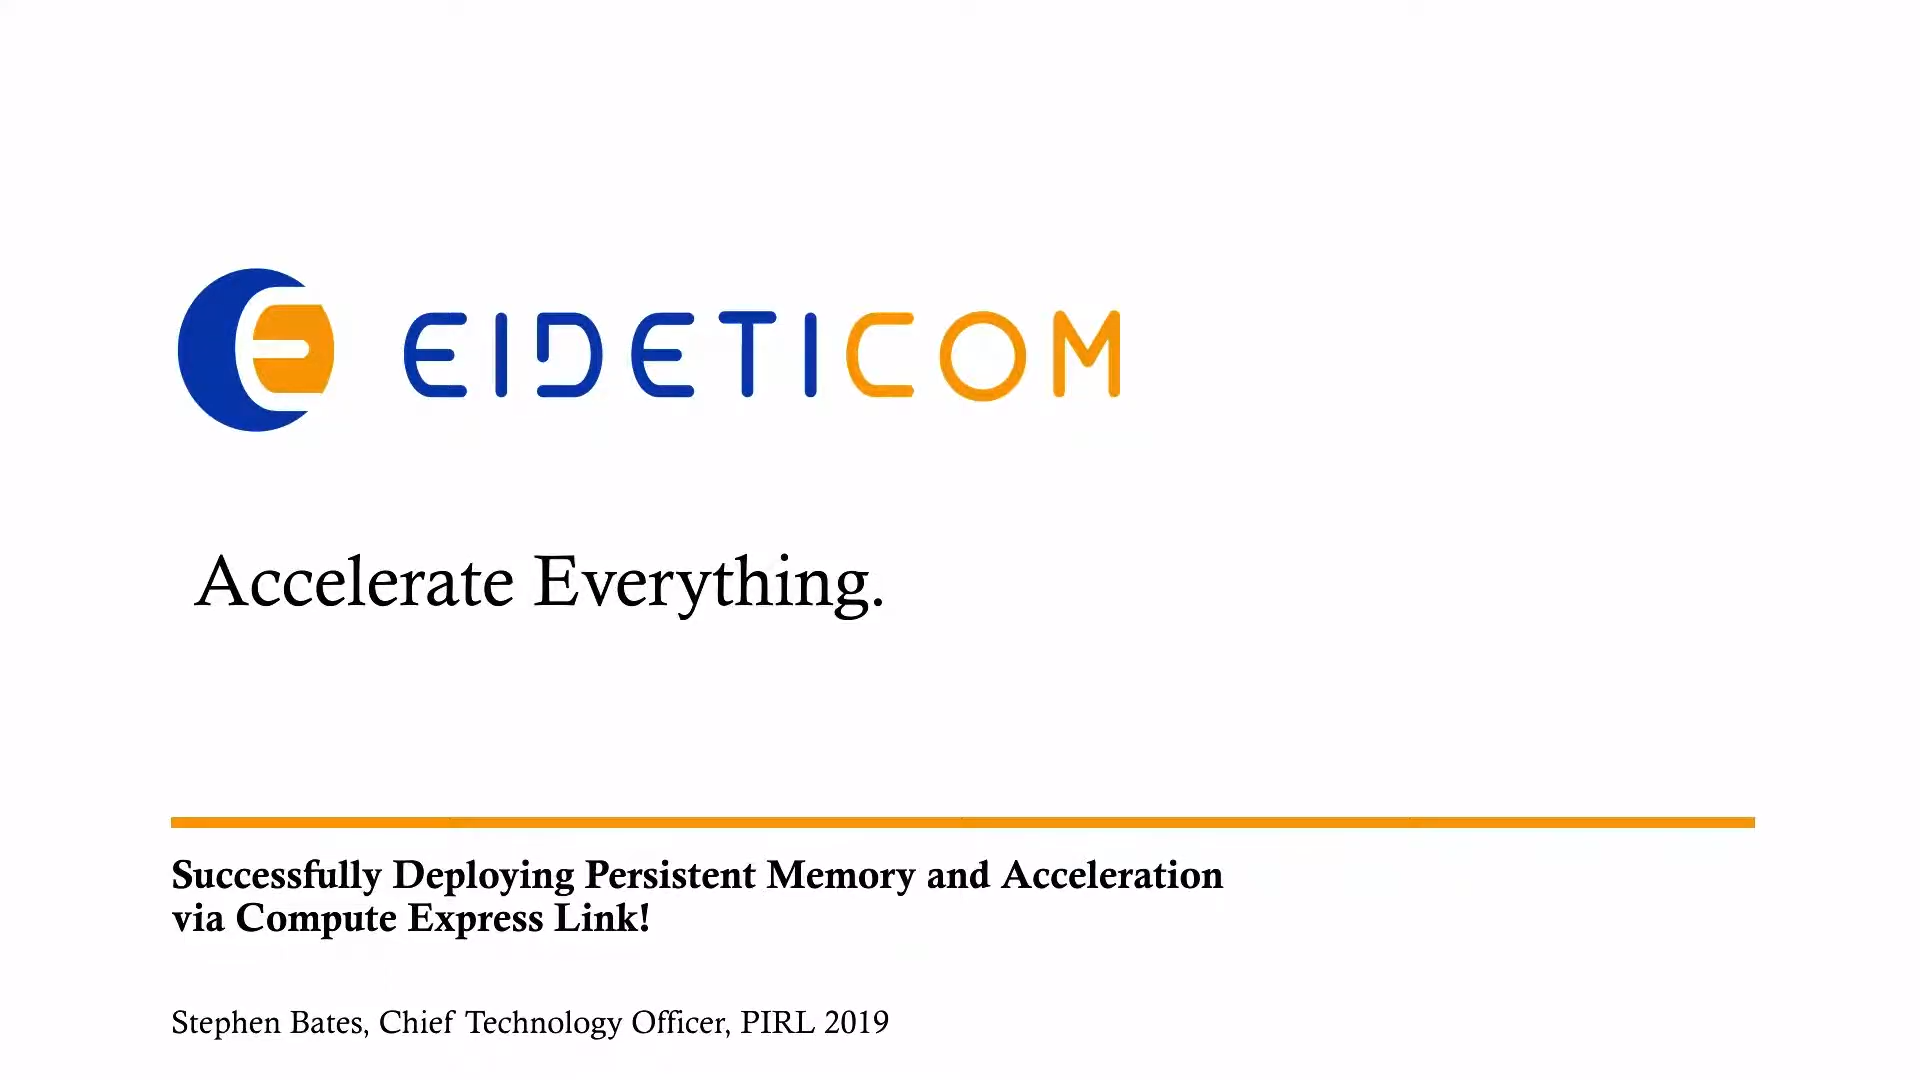 PIRL 2019: Successfully Deploying Persistent Memory and Acceleration via Compute Express Link